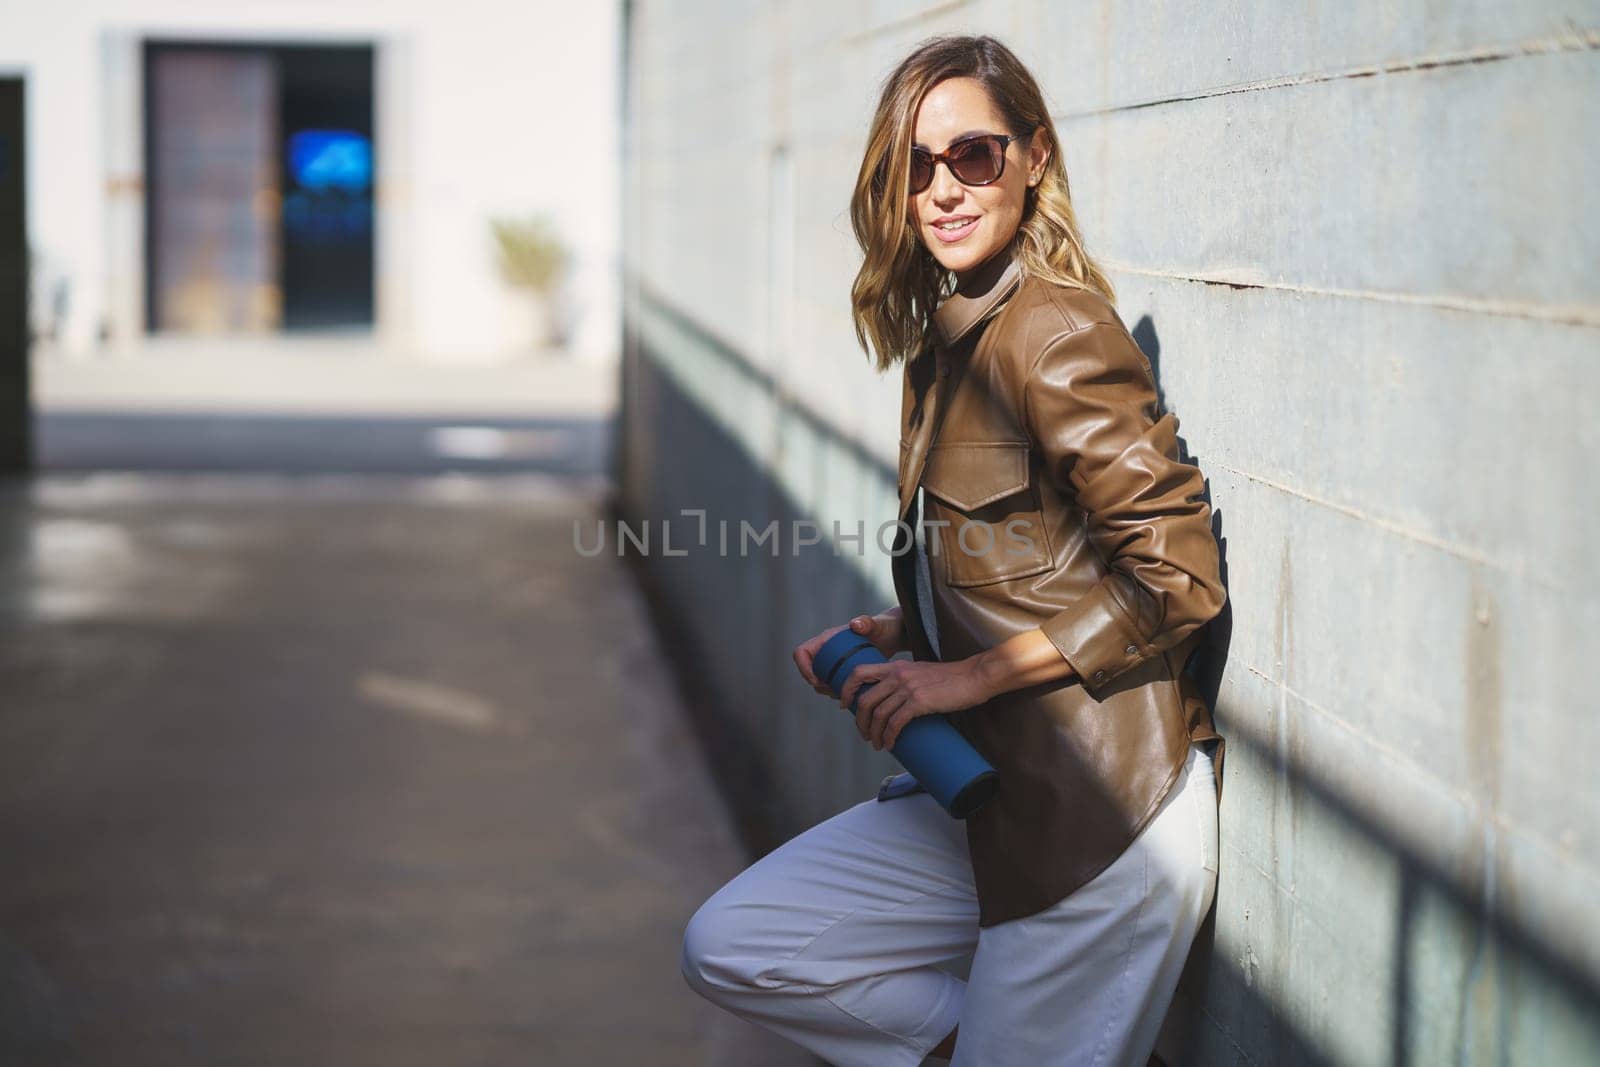 Middle aged woman with sunglasses taken a coffee break carrying an eco-friendly a thermos for coffee. Caucasian female in urban background.